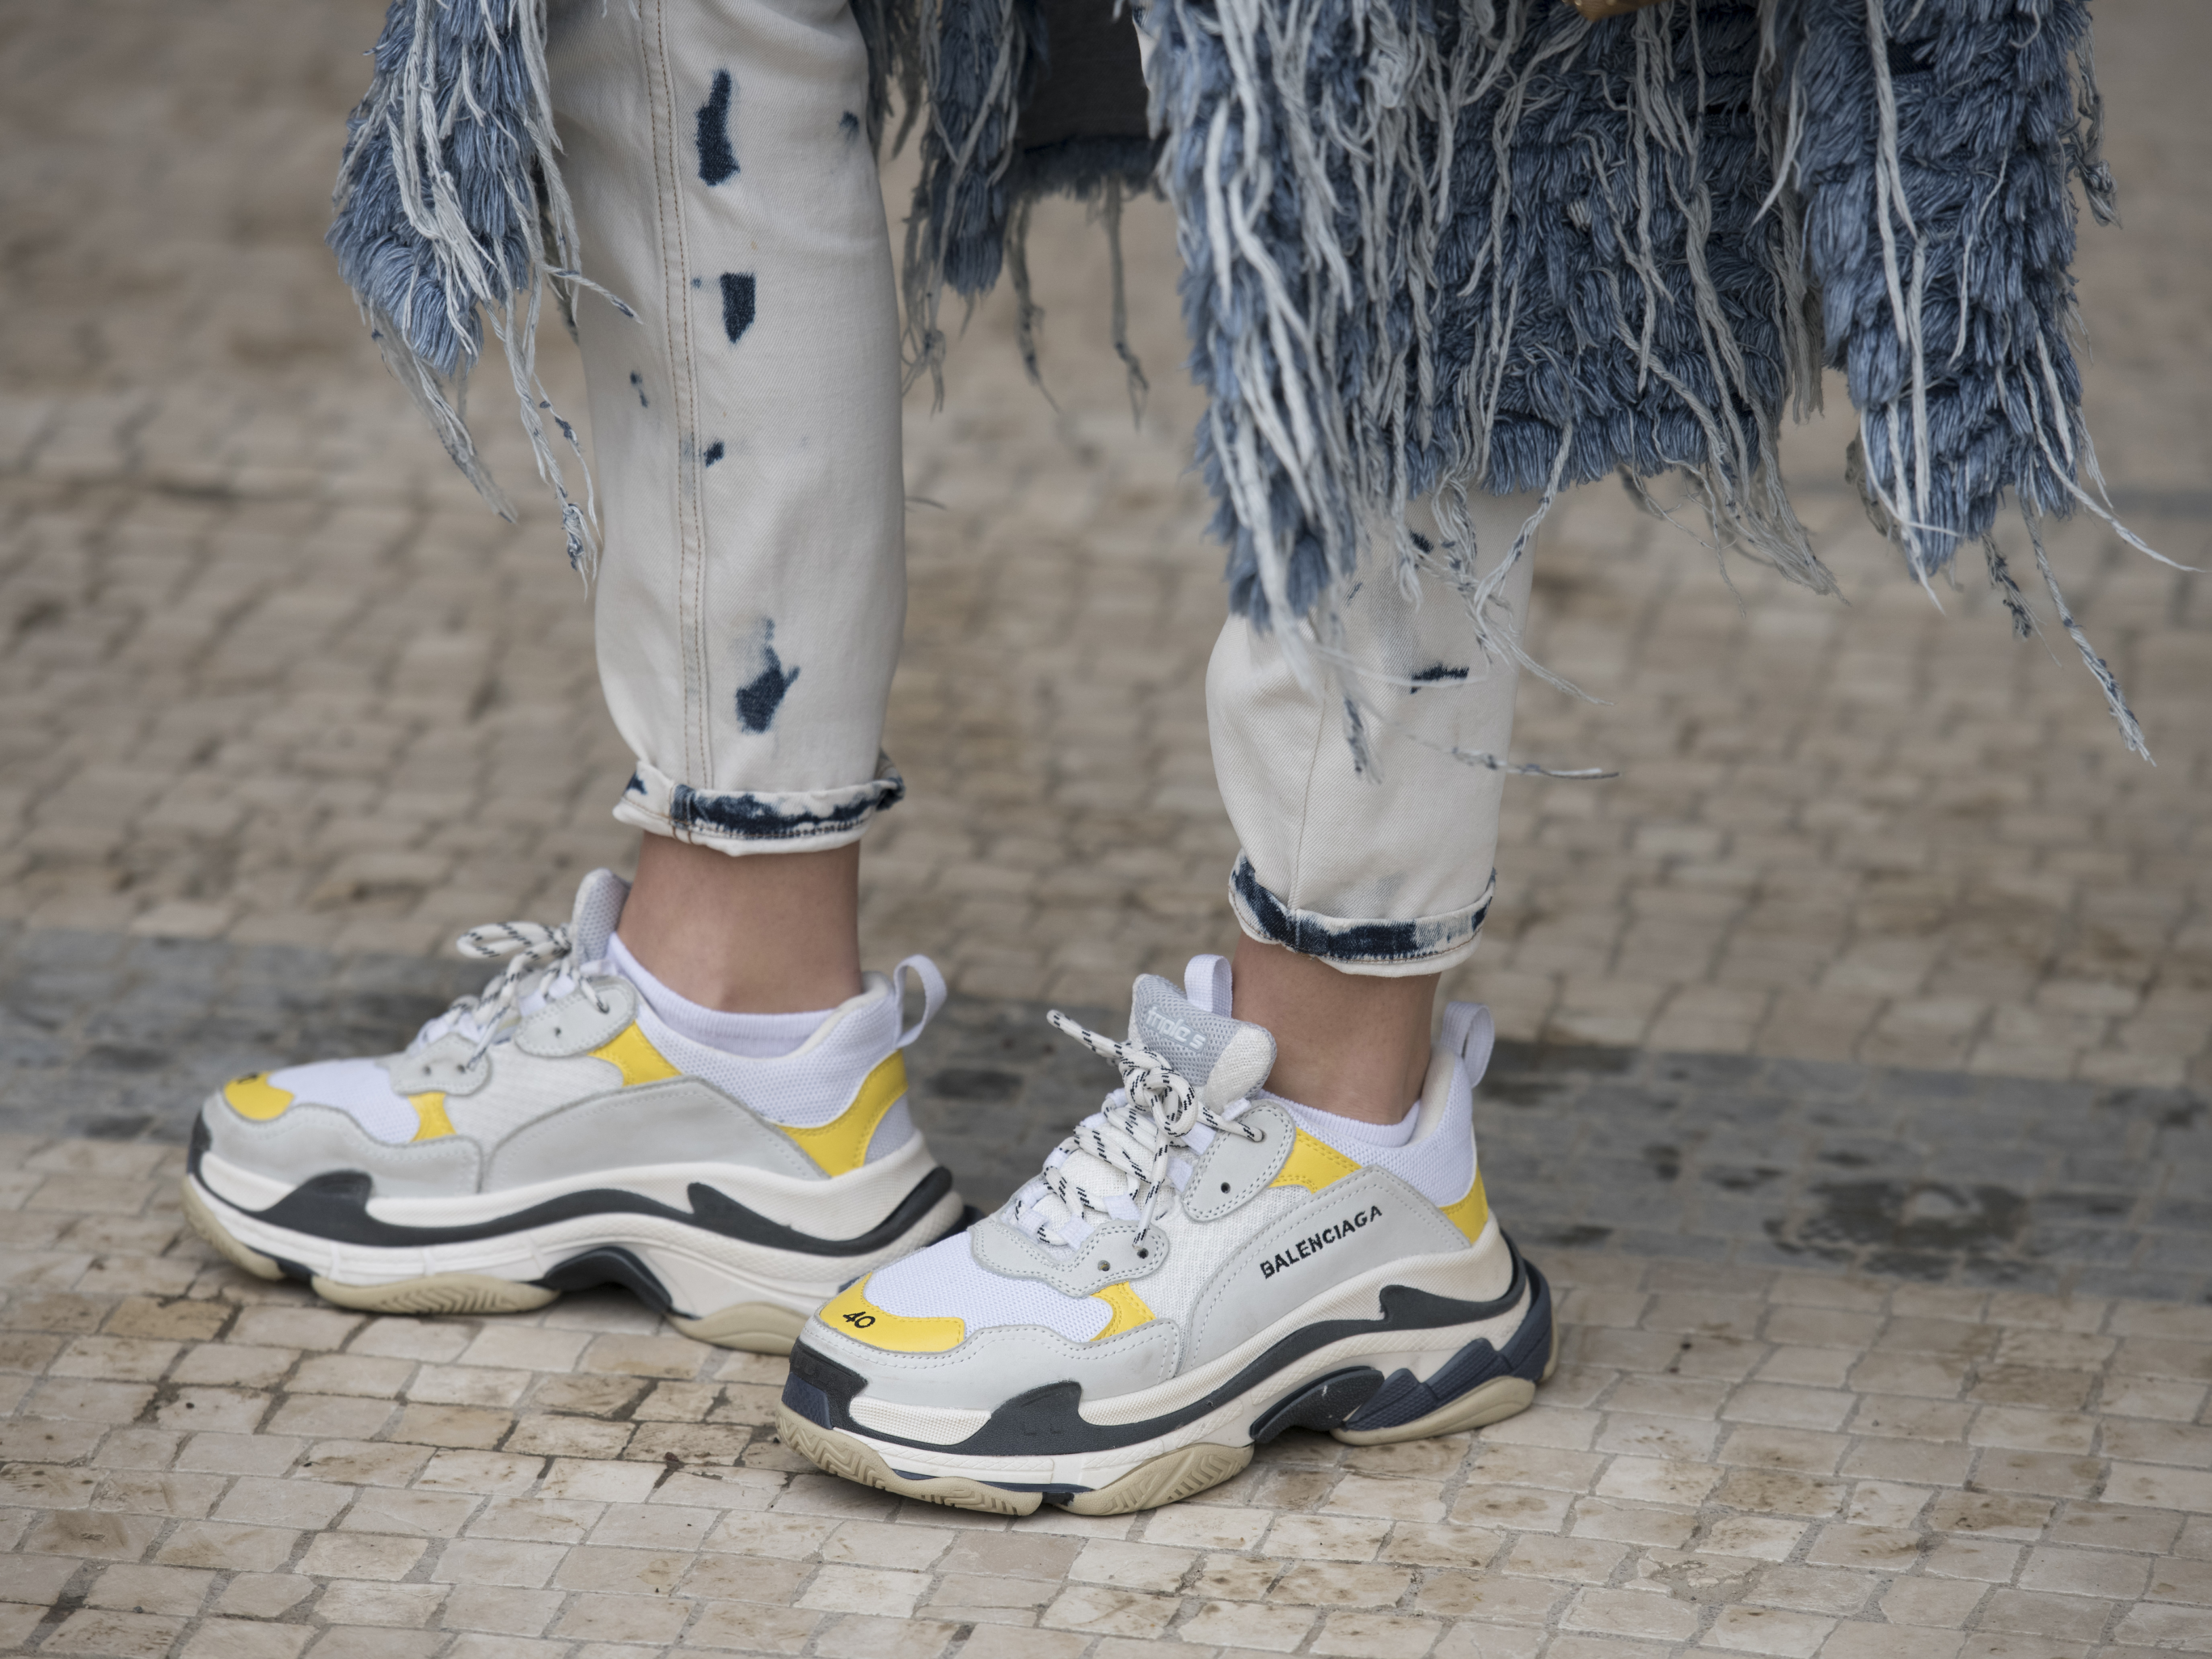 Dad sneakers: the 2018 ugly sneakers trend